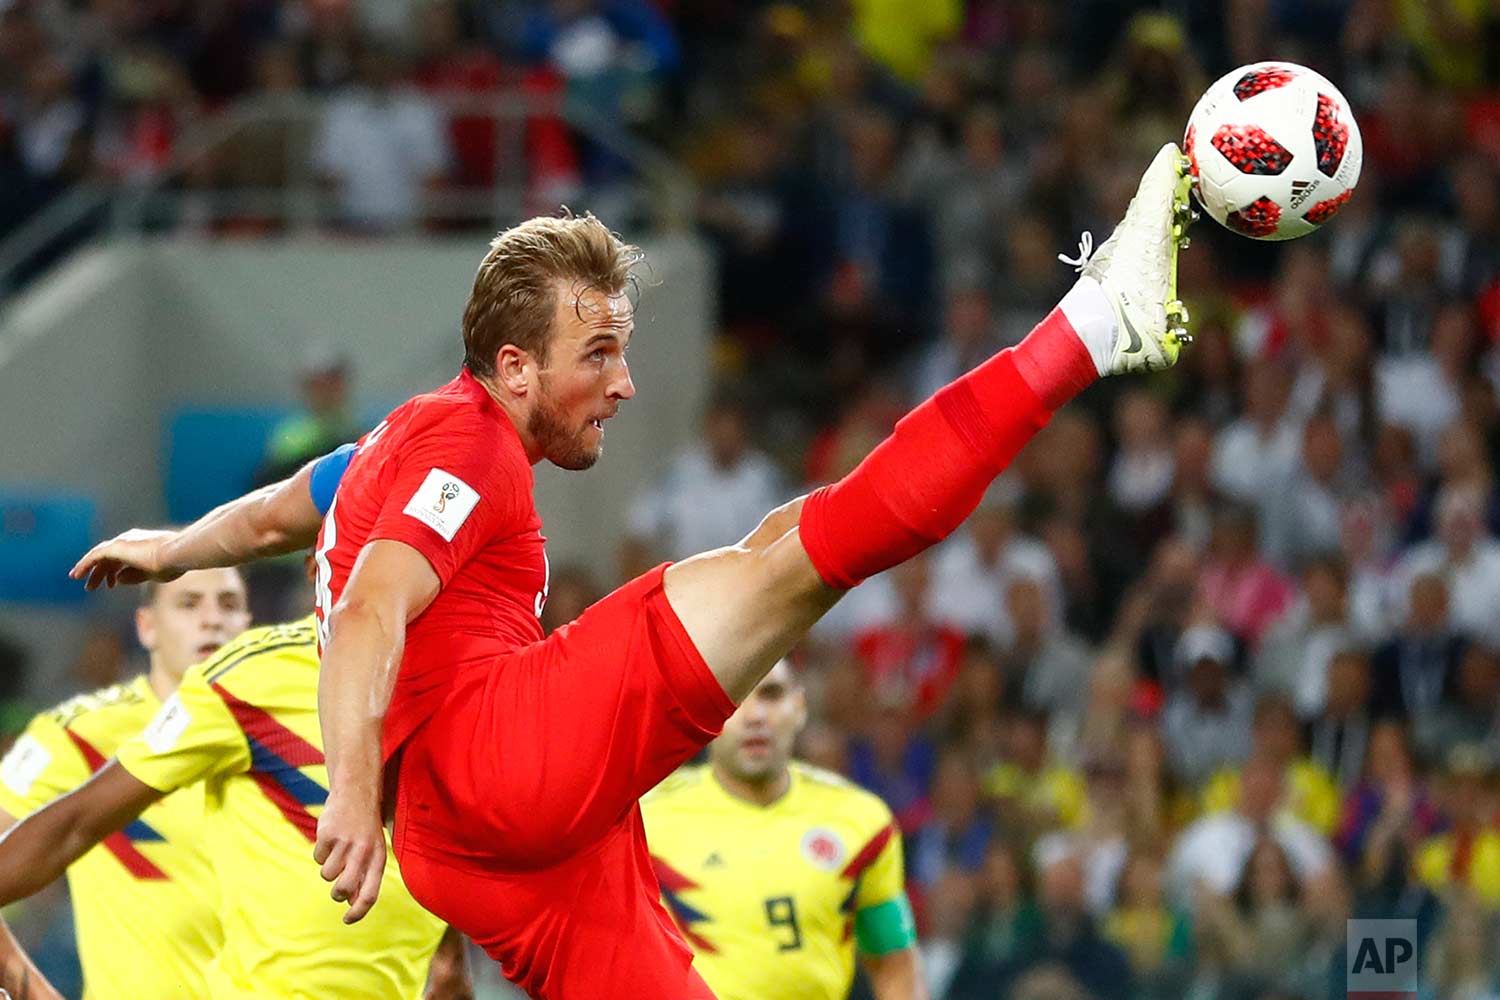  England's Harry Kane tries to control the ball during the round of 16 match between Colombia and England at the 2018 soccer World Cup in the Spartak Stadium, in Moscow, Russia, Tuesday, July 3, 2018. (AP Photo/Matthias Schrader) 